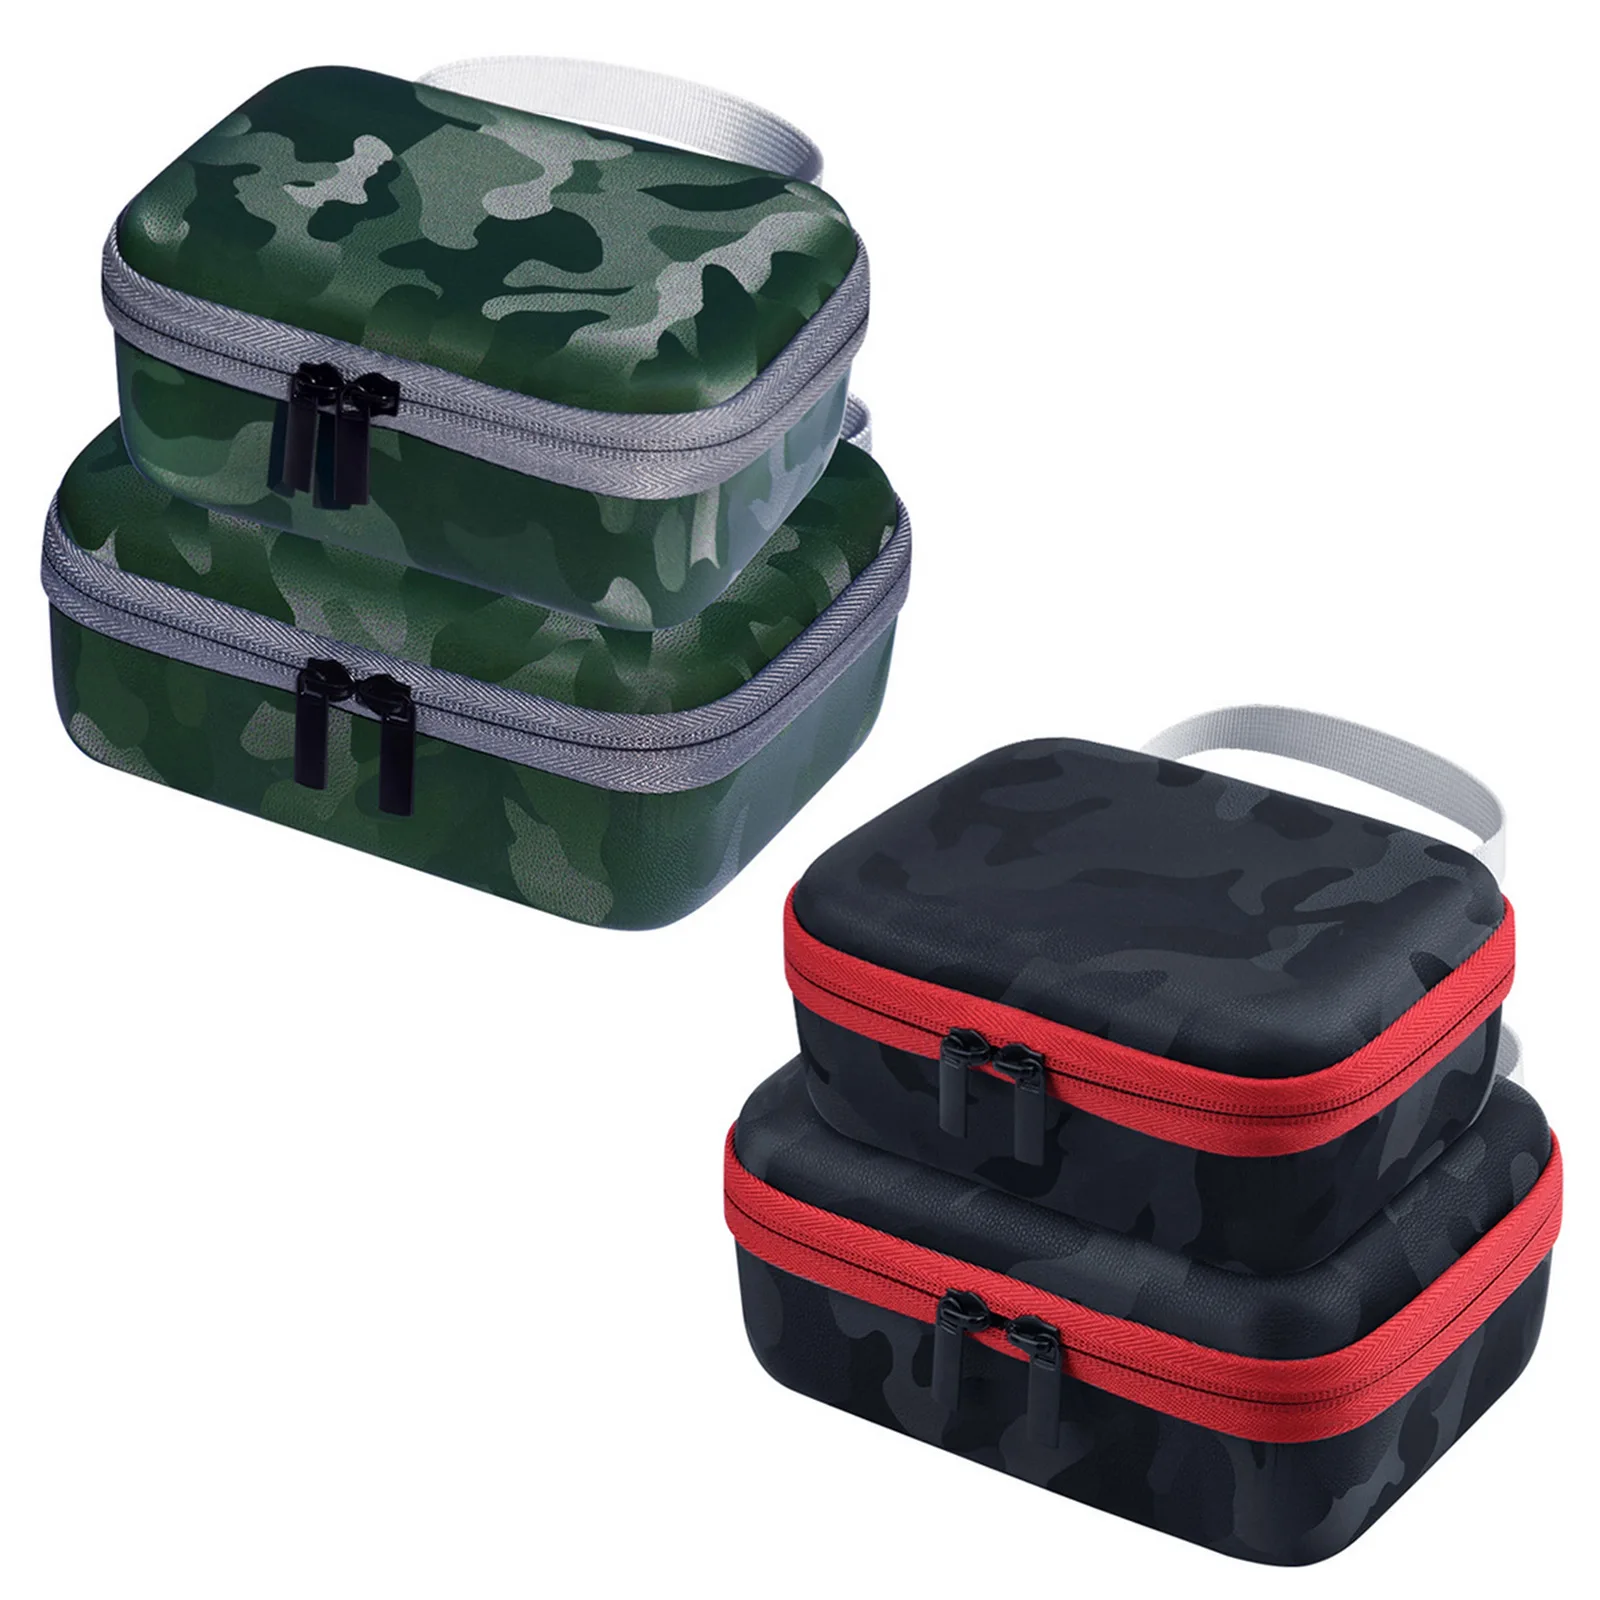 

BRDRC 2PCS Change Camouflage Drone Body Controller Storage Protective Travel Carrying Case Bag Set for DJI Mavic Mini 2